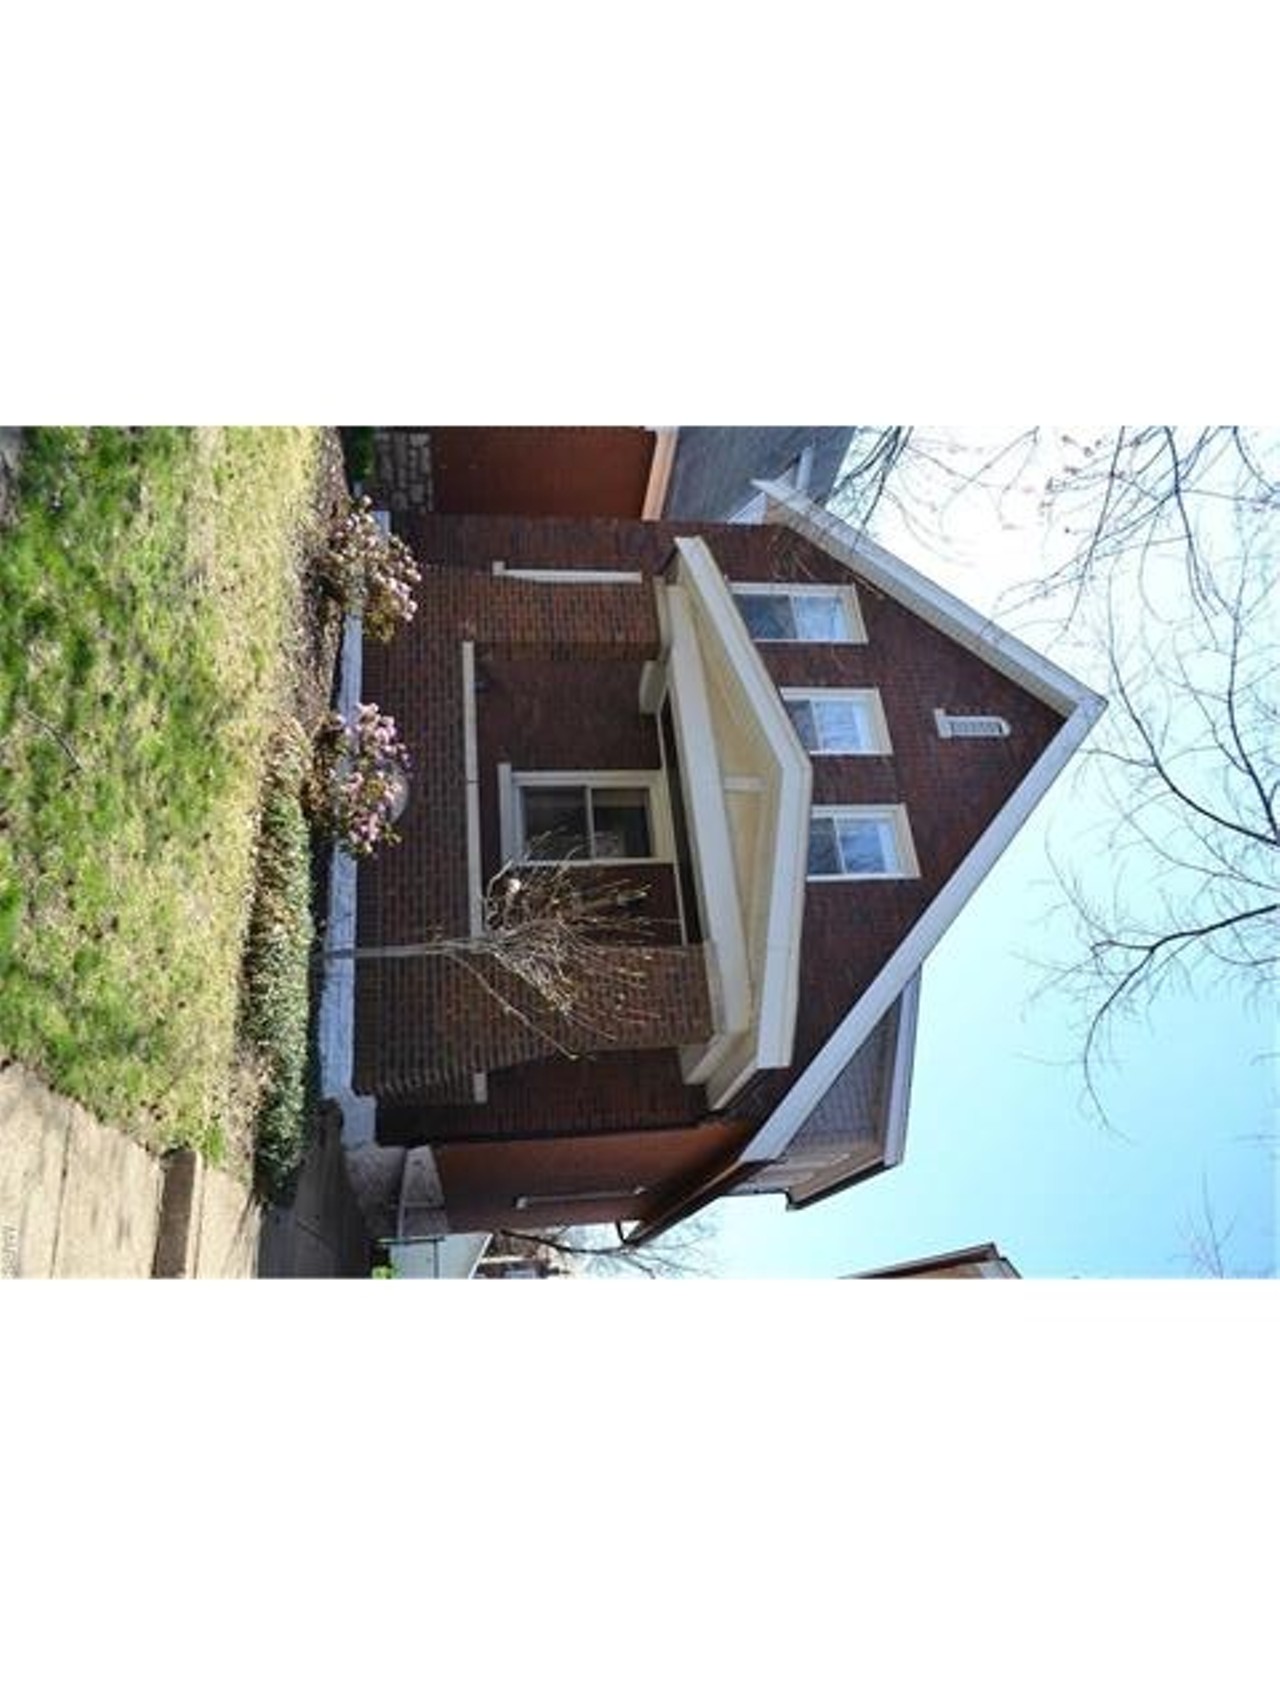 6015 Tennessee Avenue
St Louis, MO
$164,900
3 beds / 2 baths / 1,225 sqft / 2,962 lot sqft
Two minute drive to Carondelet Park. Directions here.
Not only is this home move-in ready, but it's also within walking distance of Carondelet Park, Starbucks and the YMCA.